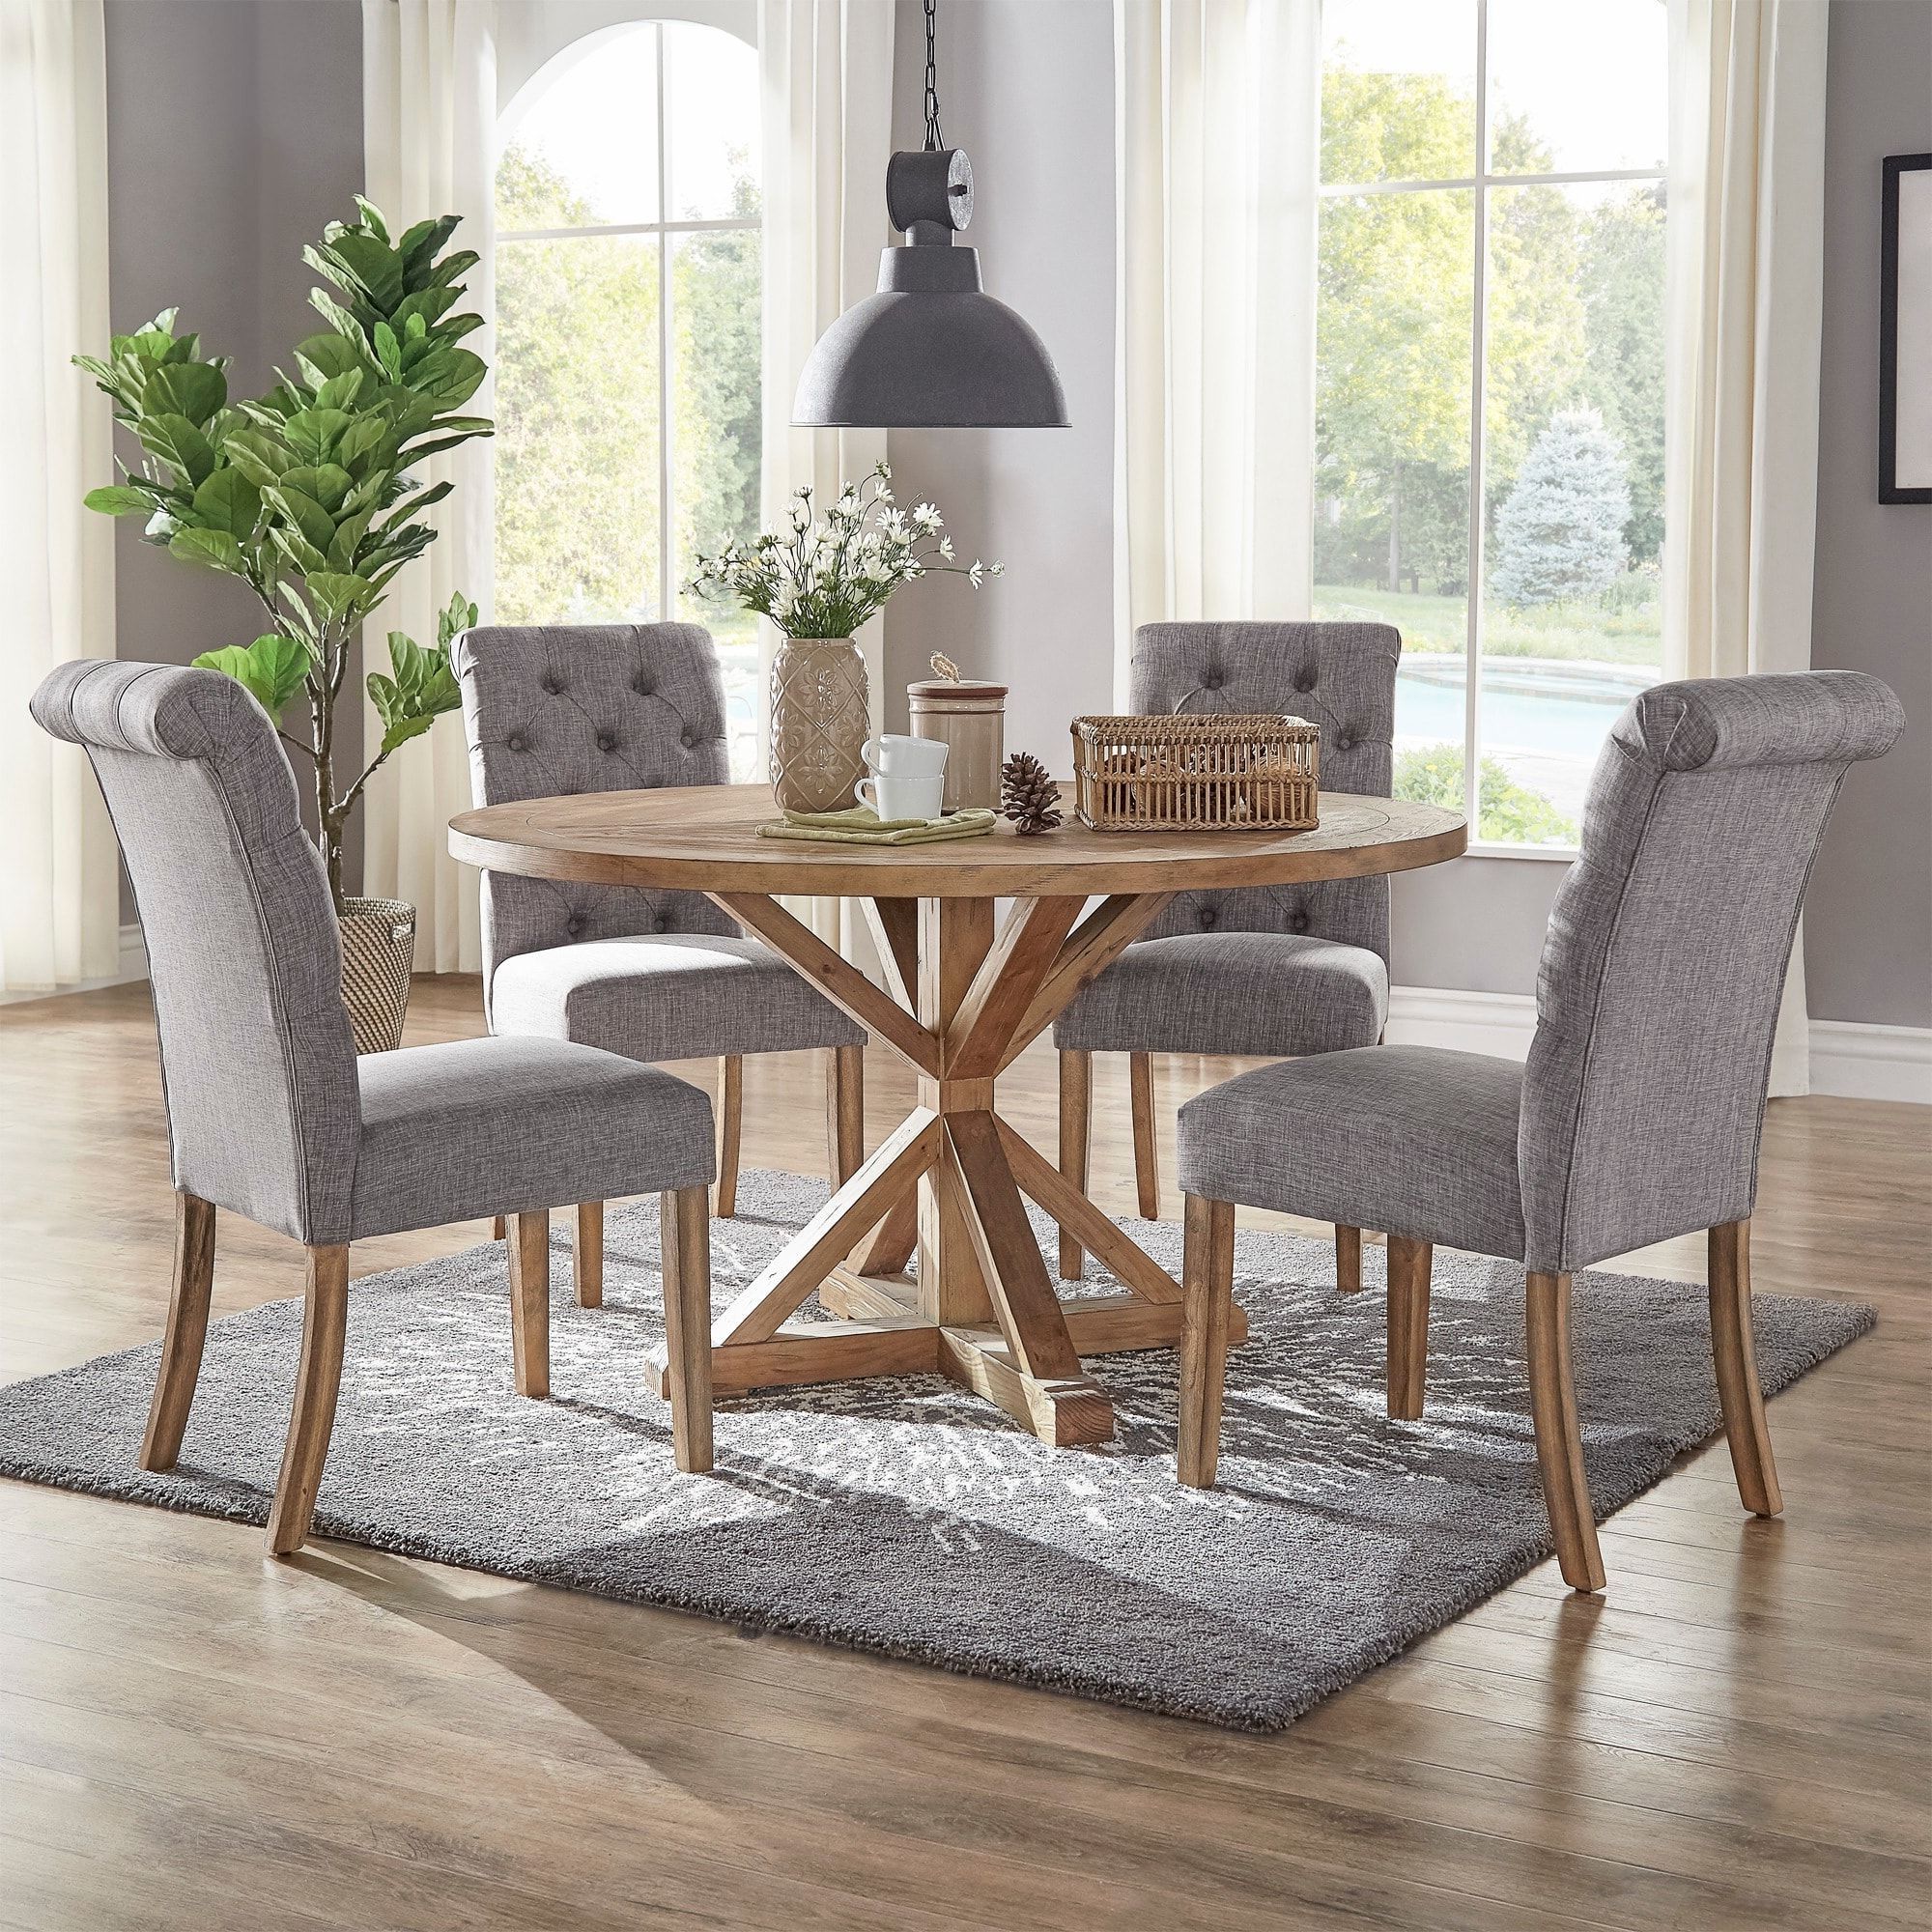 Benchwright Rustic X Base 48 Inch Round Dining Table Set For 2019 Benchwright Round Pedestal Dining Tables (View 4 of 25)